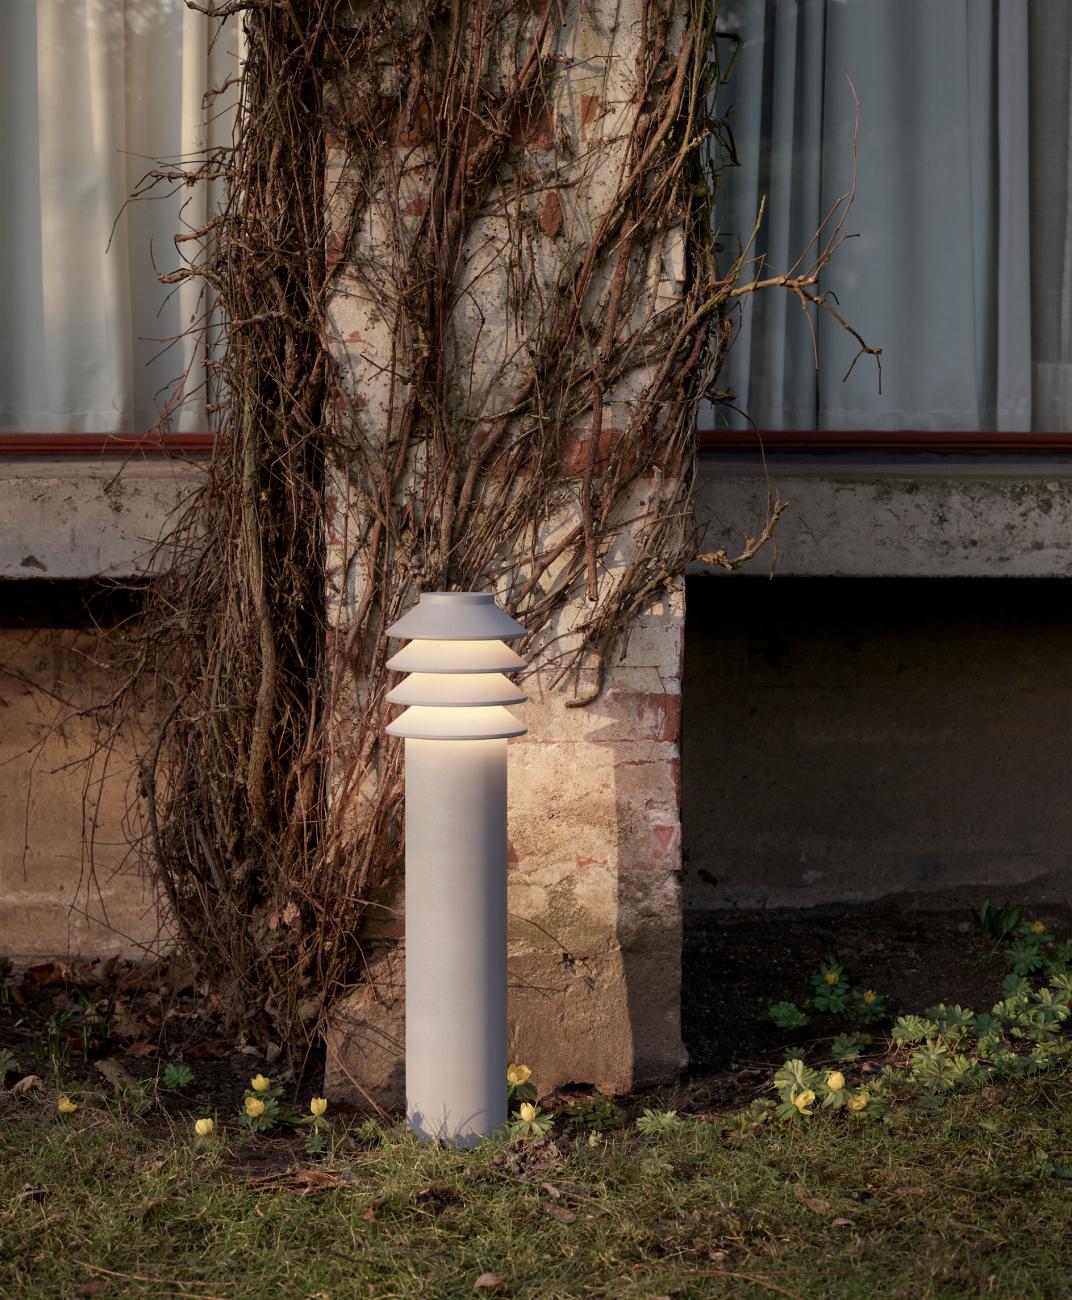 'Bysted Garden Short' Outdoor Bollard Light for Louis Poulsen in Aluminum

'Bysted Garden' is a downscaled version of Peter Bysted's award-winning bollard. Its four rings provide a gentle glow, while their white underside creates a reflection which